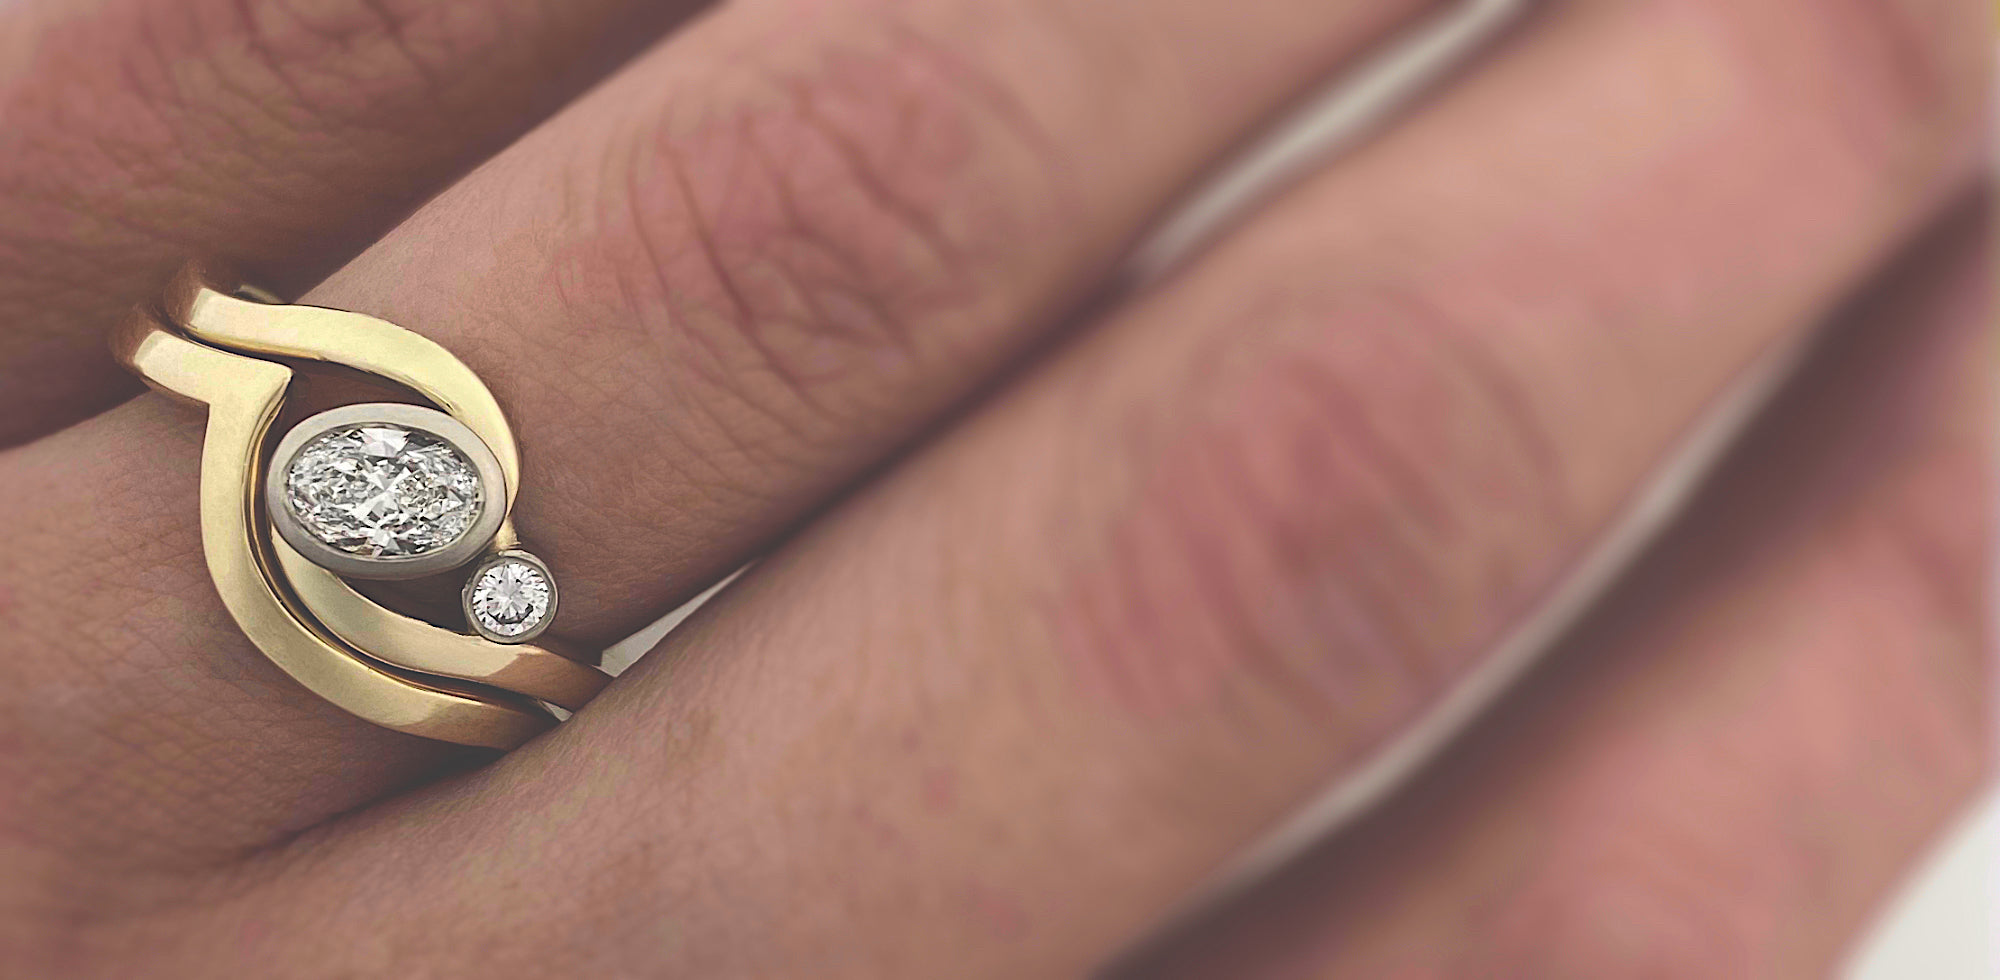 A handmade bespoke gold ring with two diamonds, worn on a hand